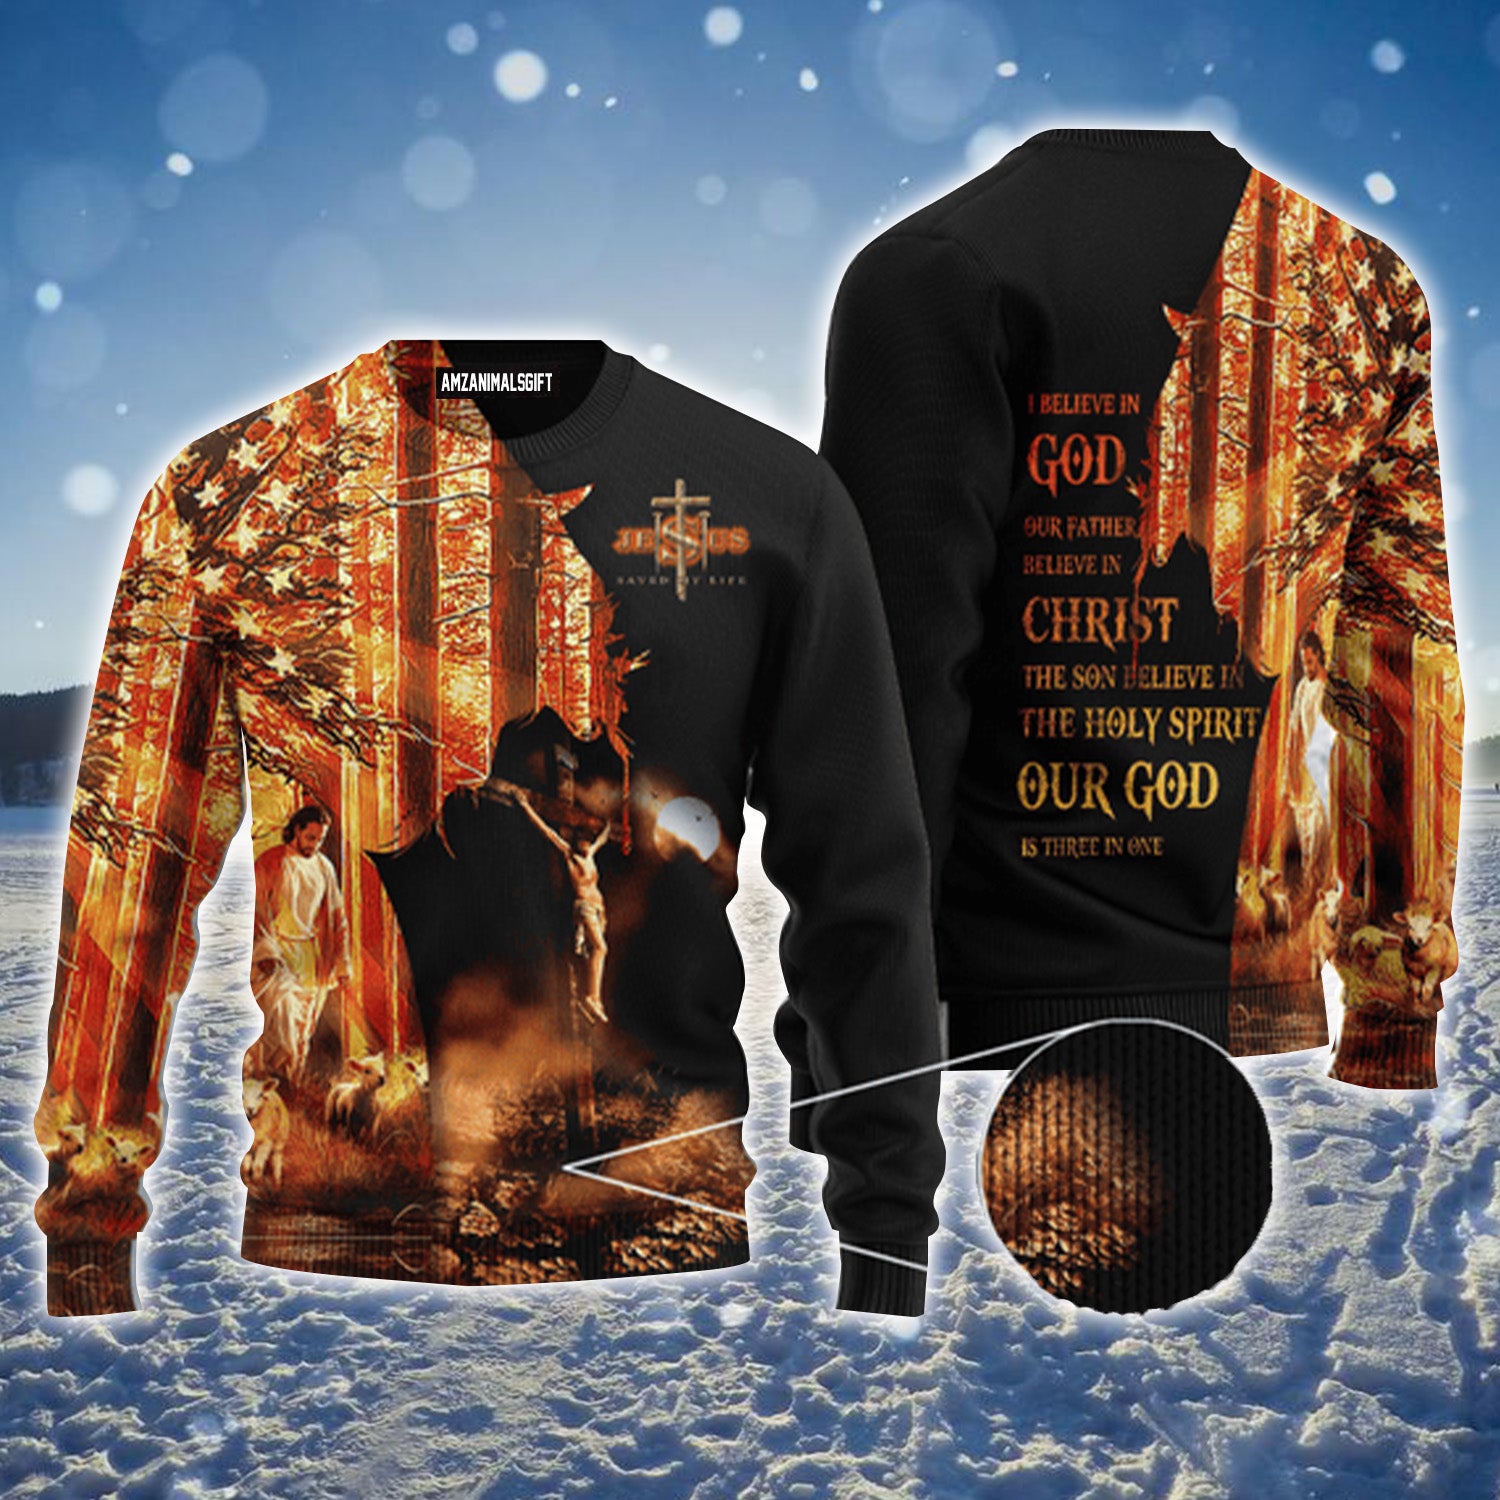 Jesus Cross I Believe In God Urly Sweater, Christmas Sweater For Men & Women - Perfect Gift For New Year, Winter, Christmas